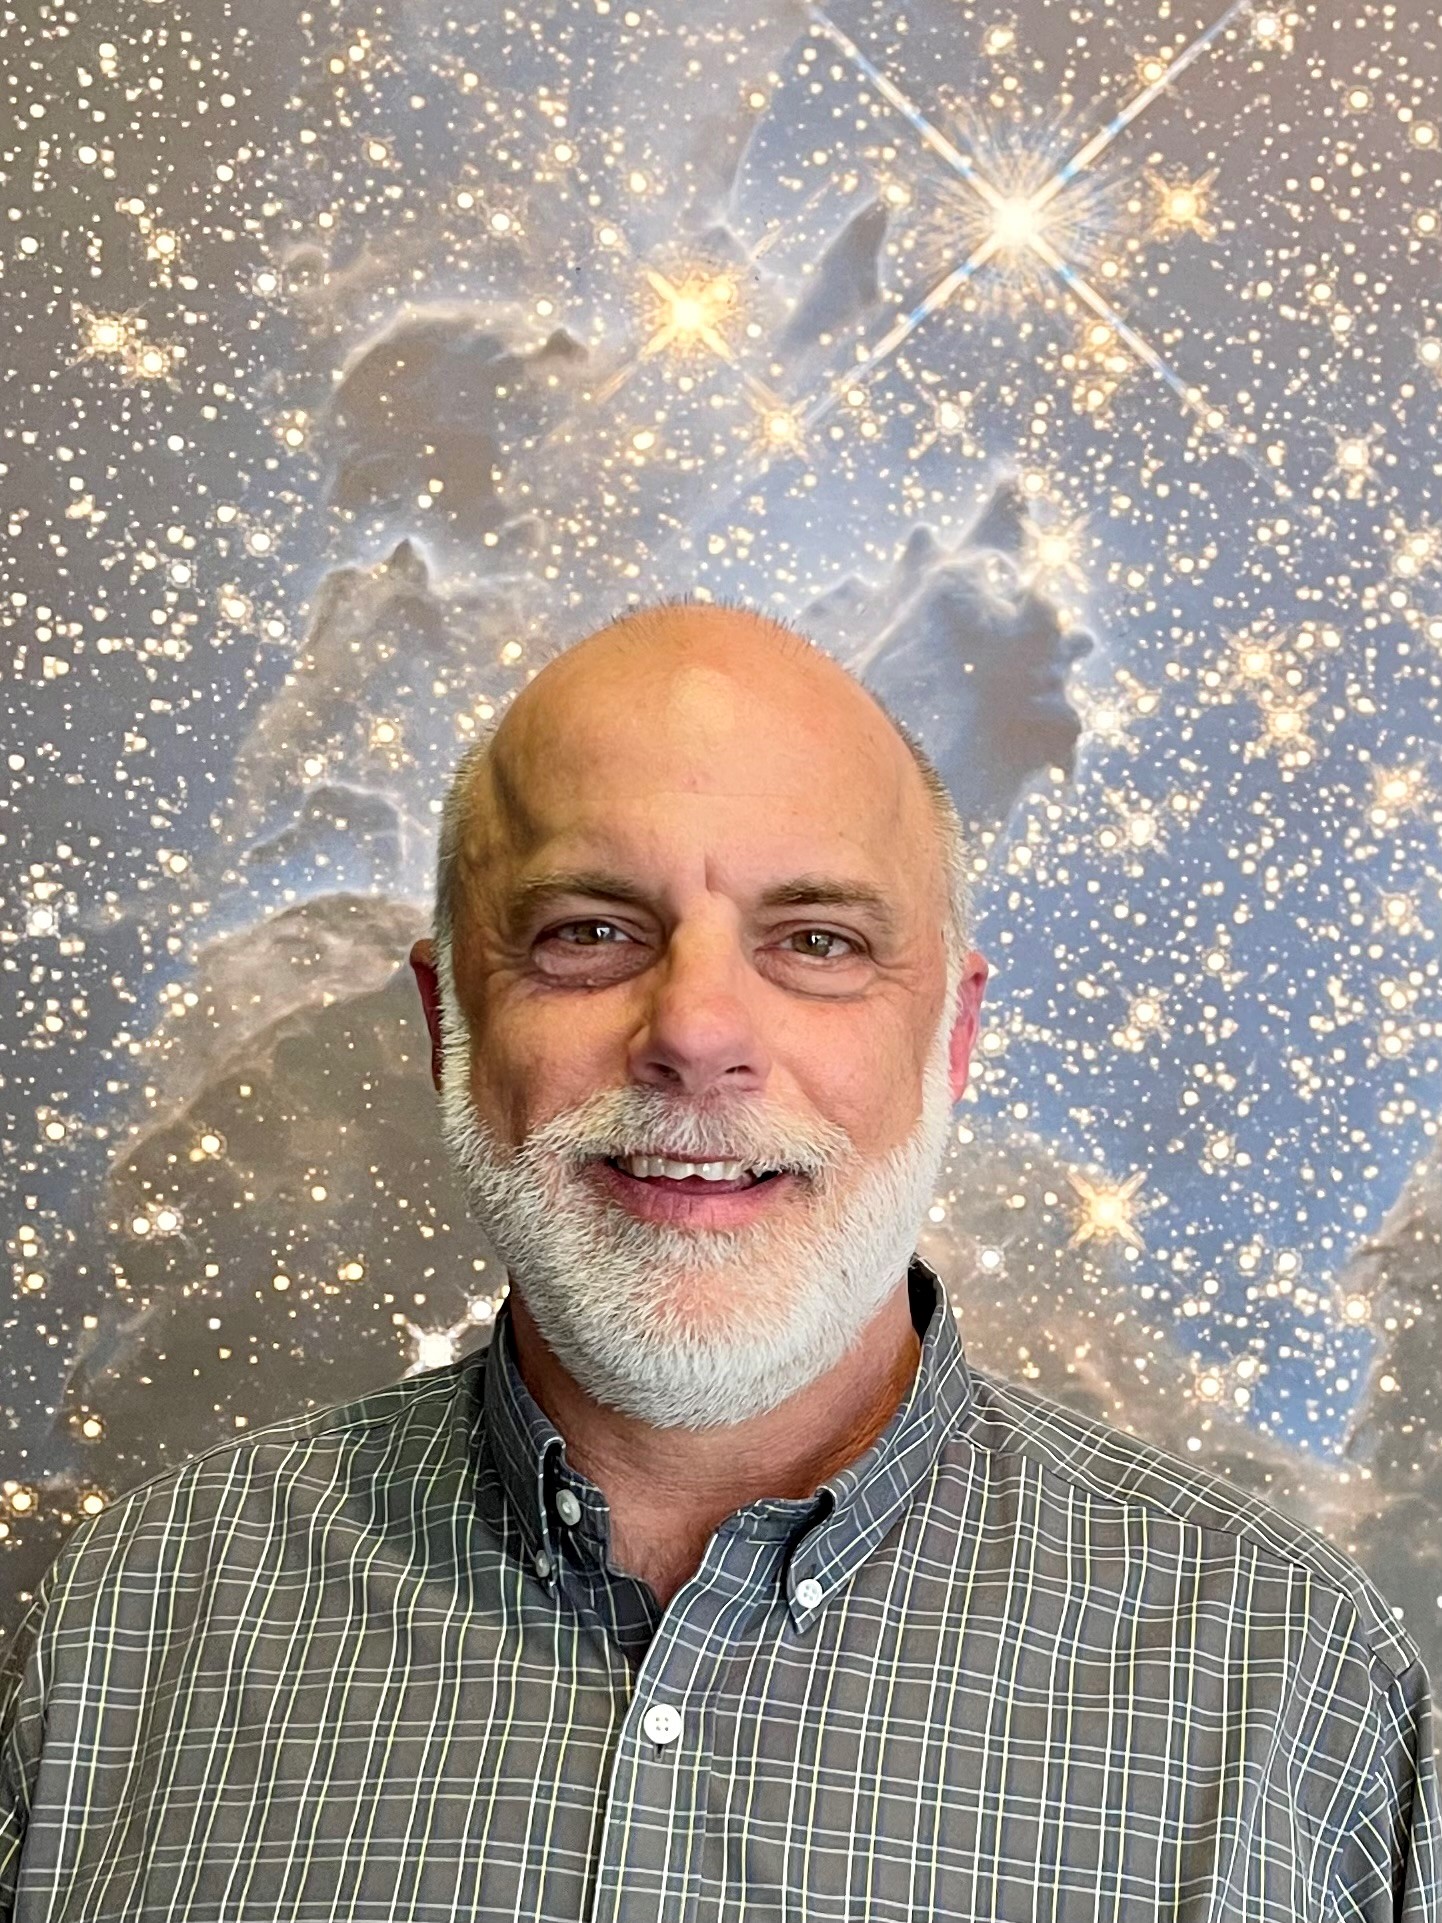 Randy Koster, a man with a white beard, smiles at the camera in a portrait. He wears a green checked shirt and stands in front of a faded galaxy background.